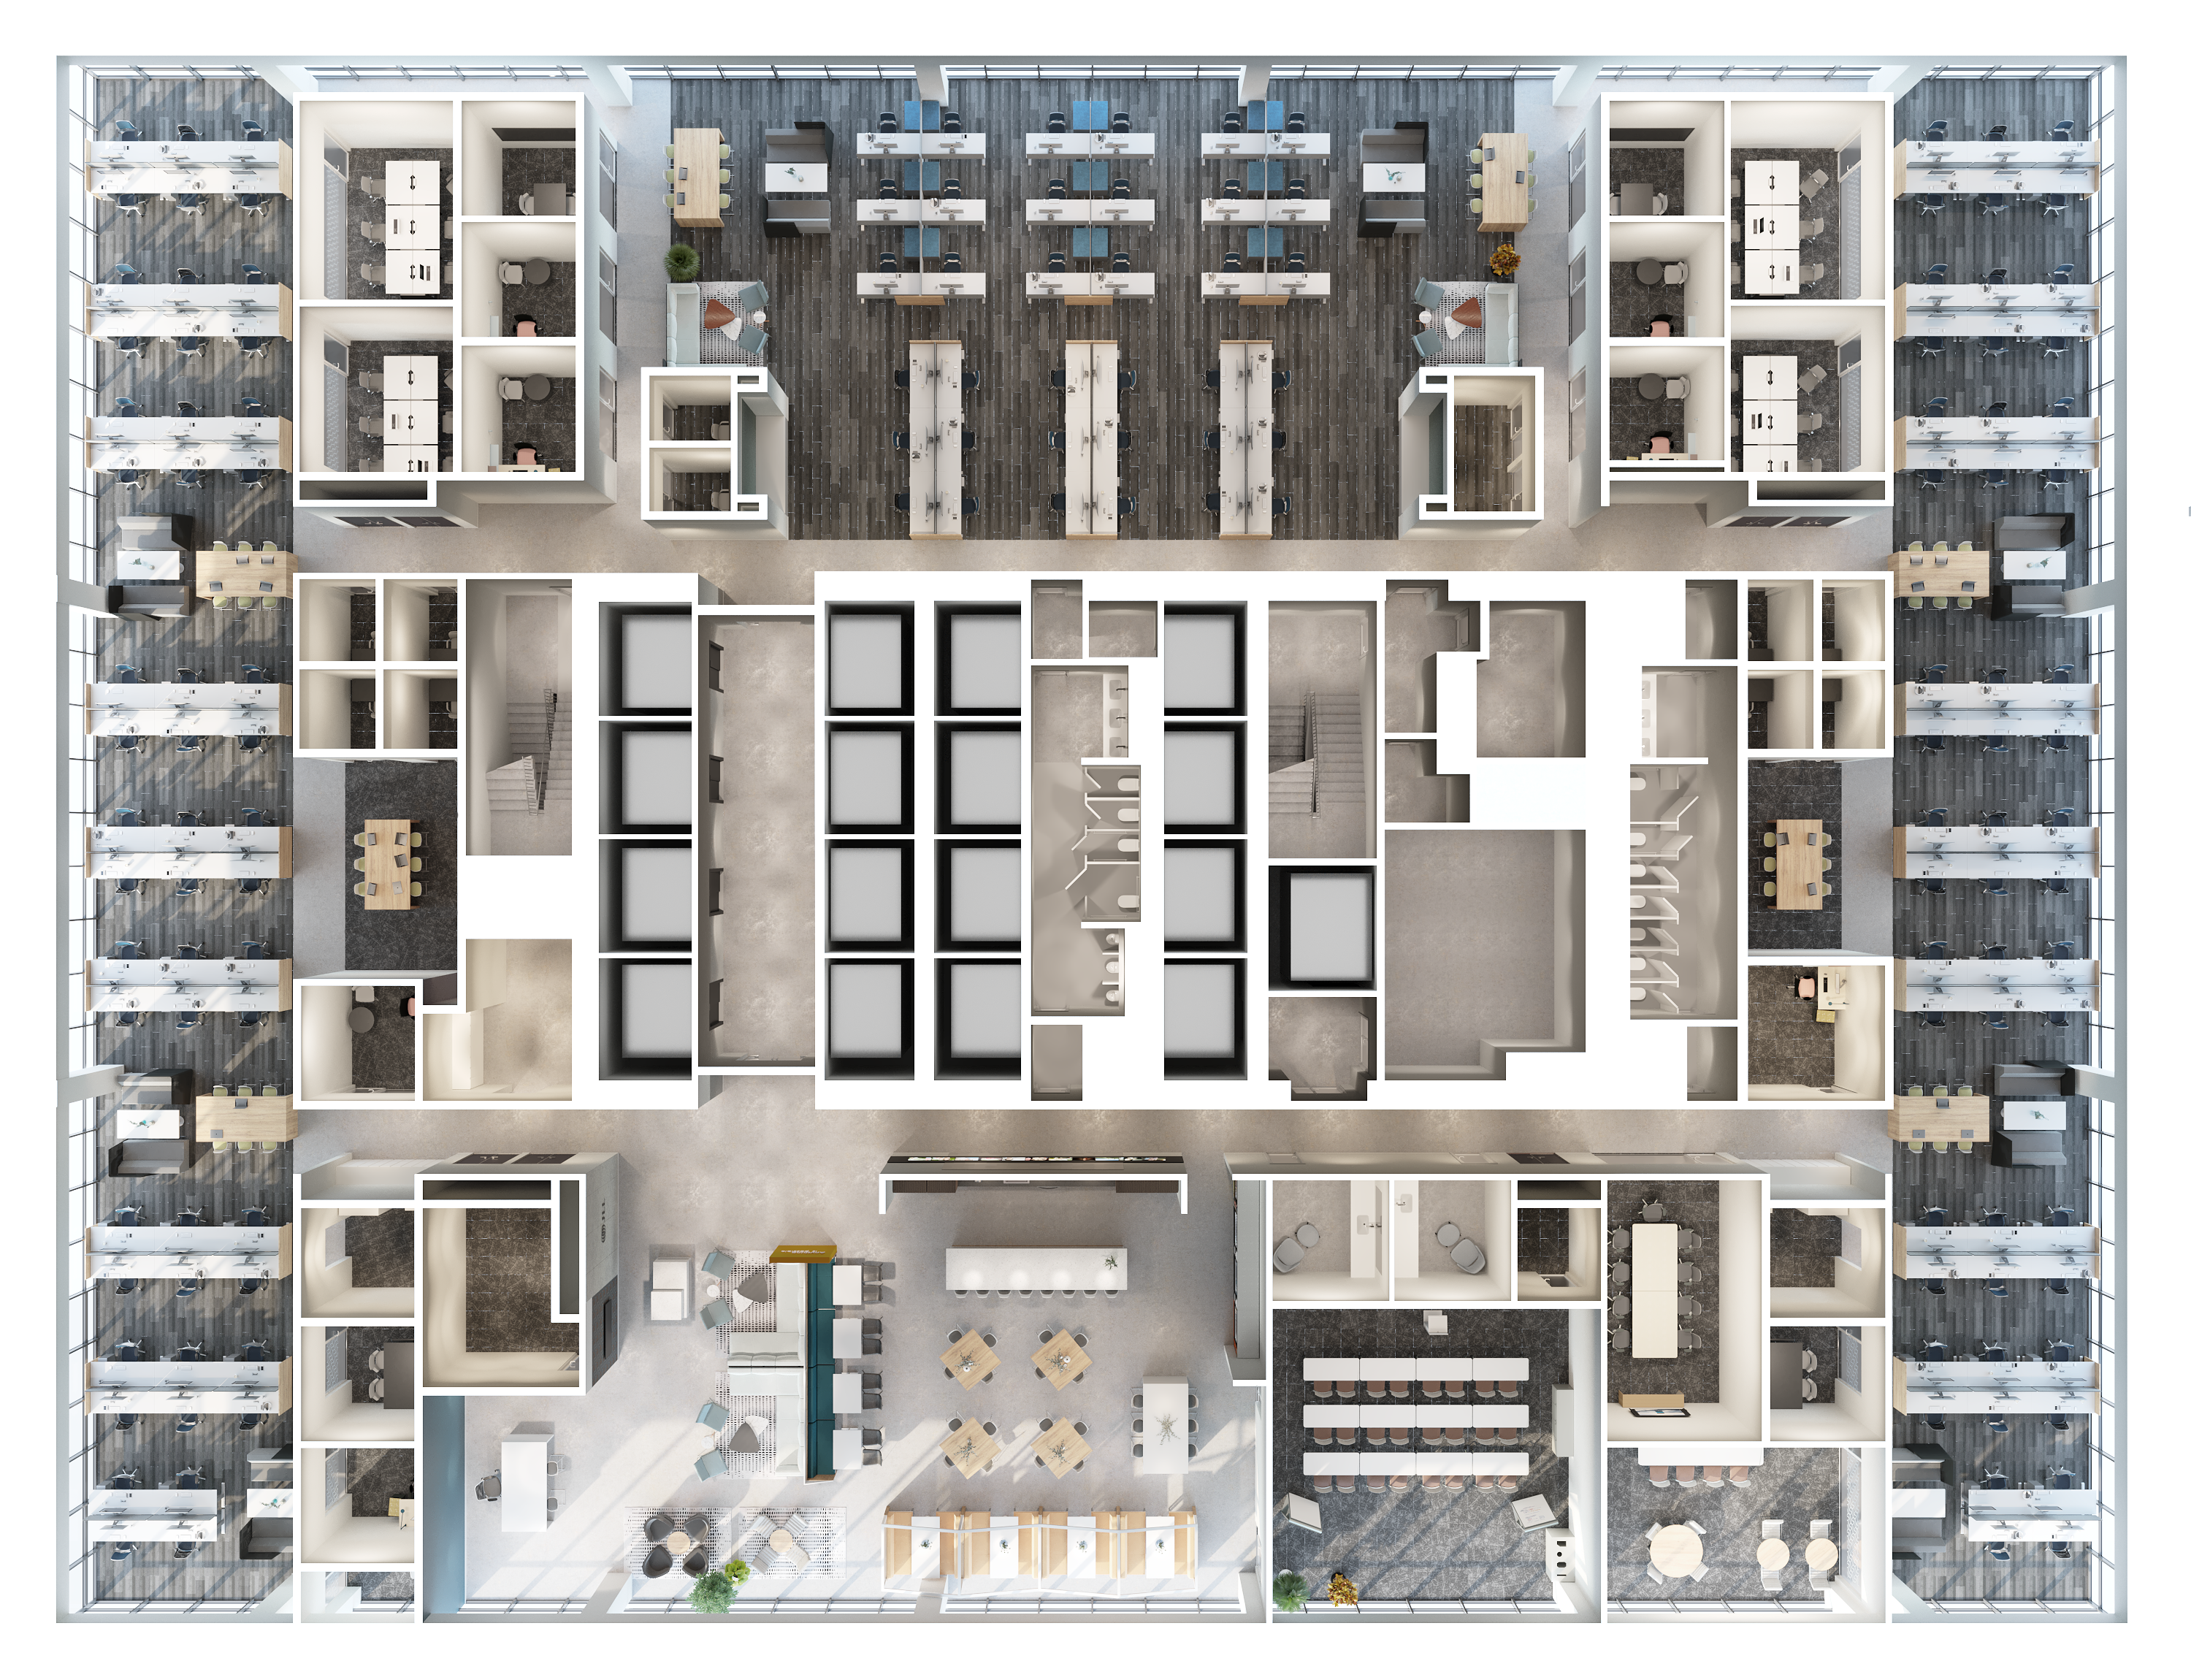 3D Floor Plan of a commercial office